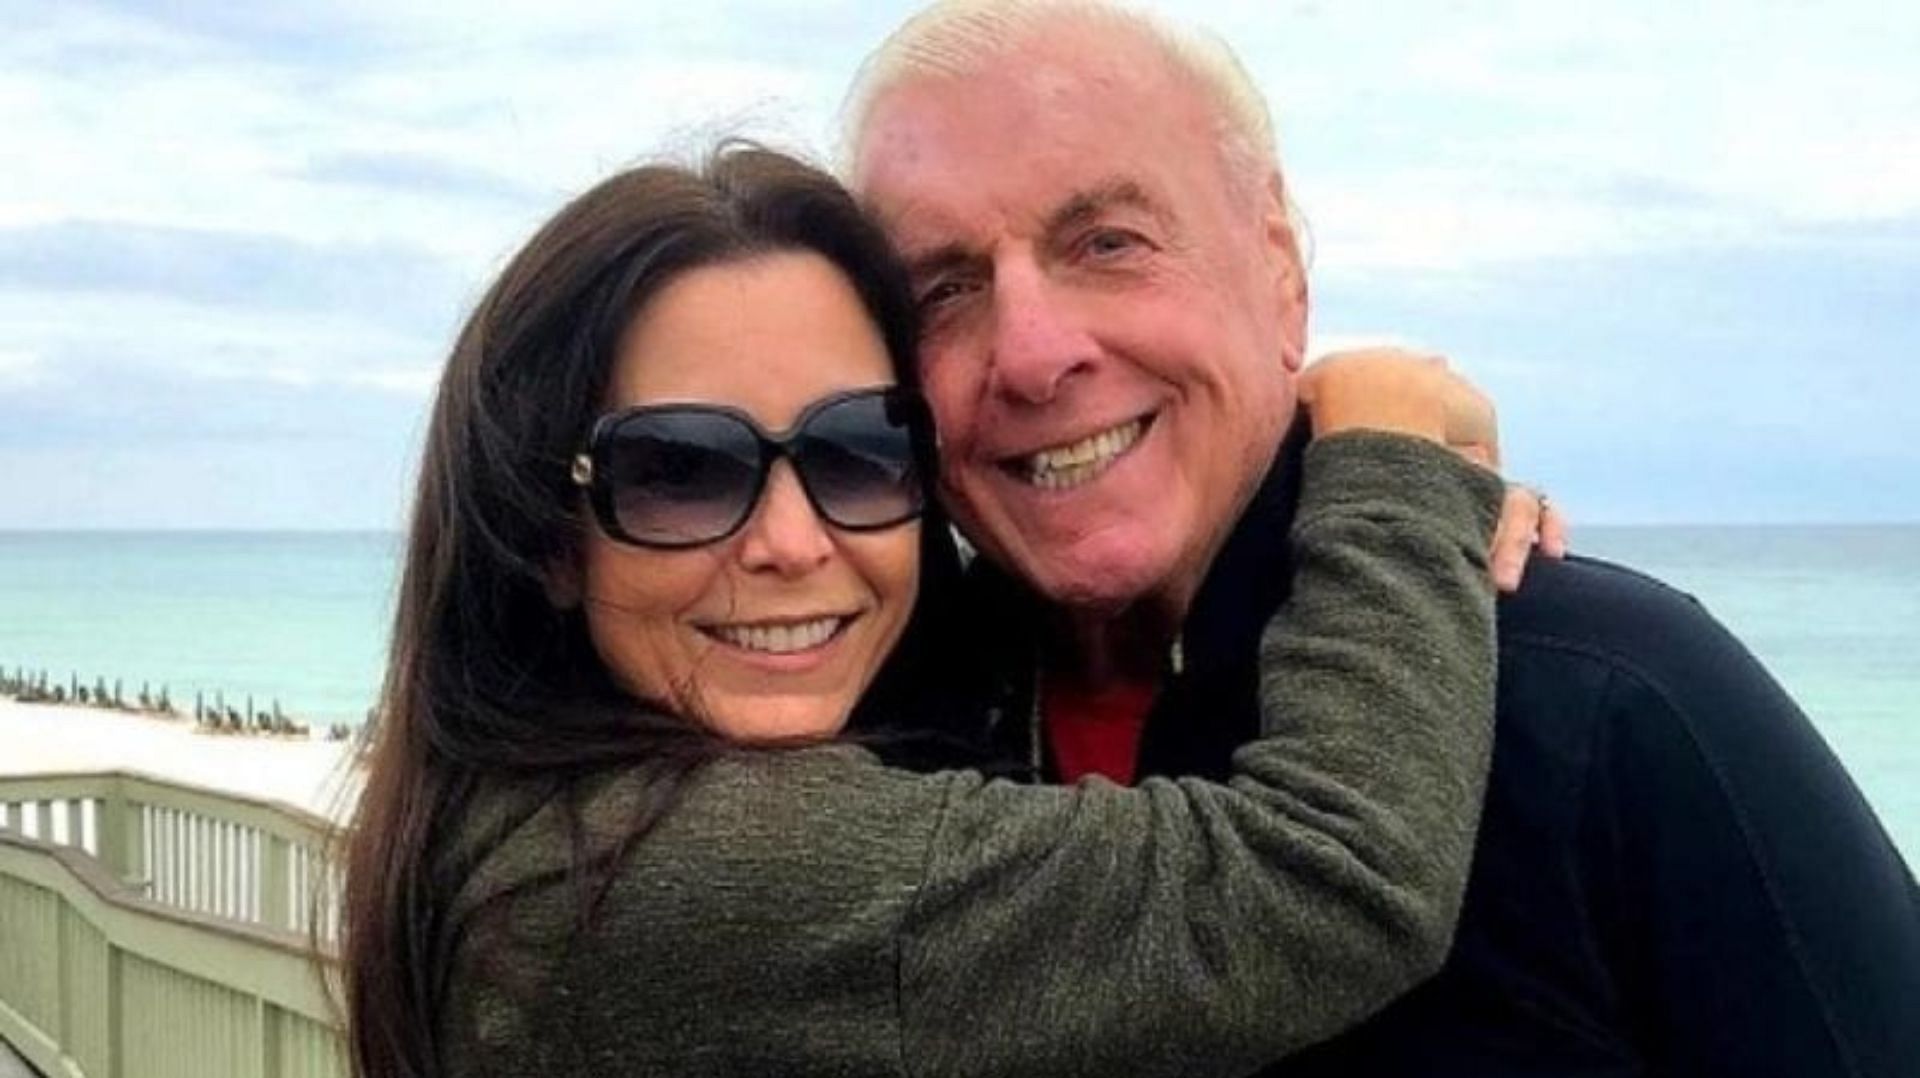 Ric Flair is back together with Wendy Barlow.